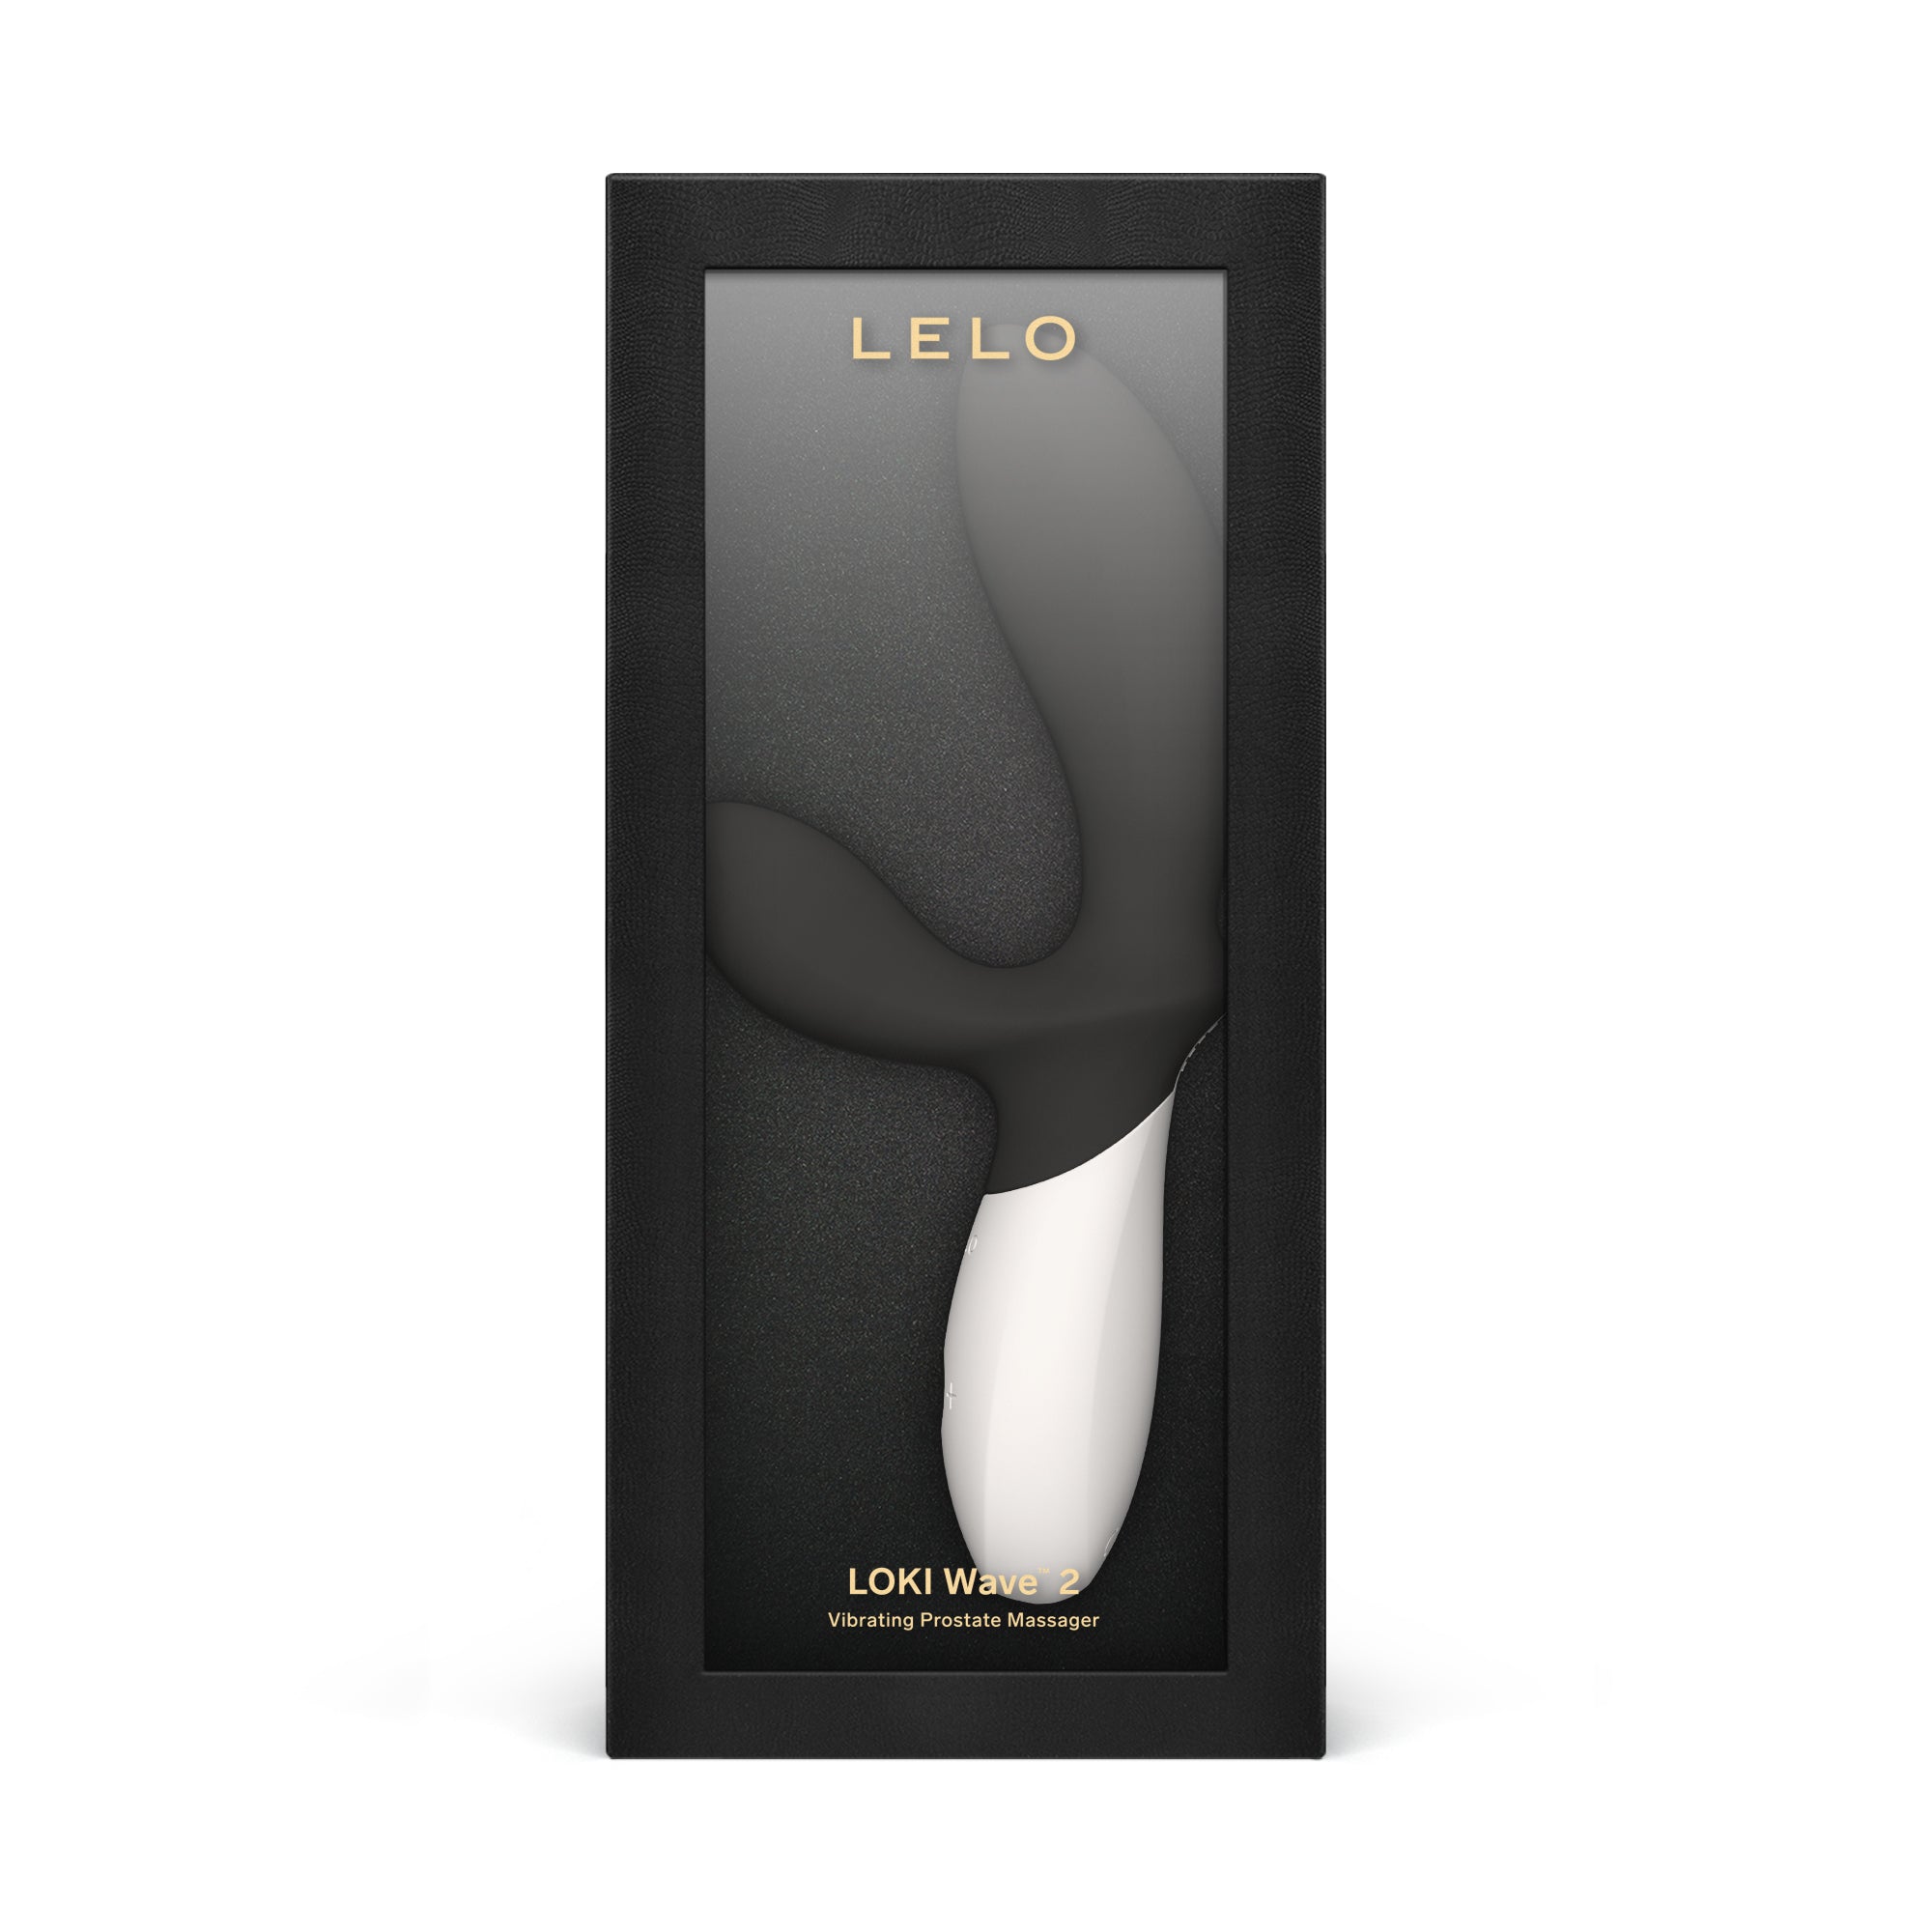 LeLo Loki Wave 2 Black Prostrate Massager shown in a black display style package